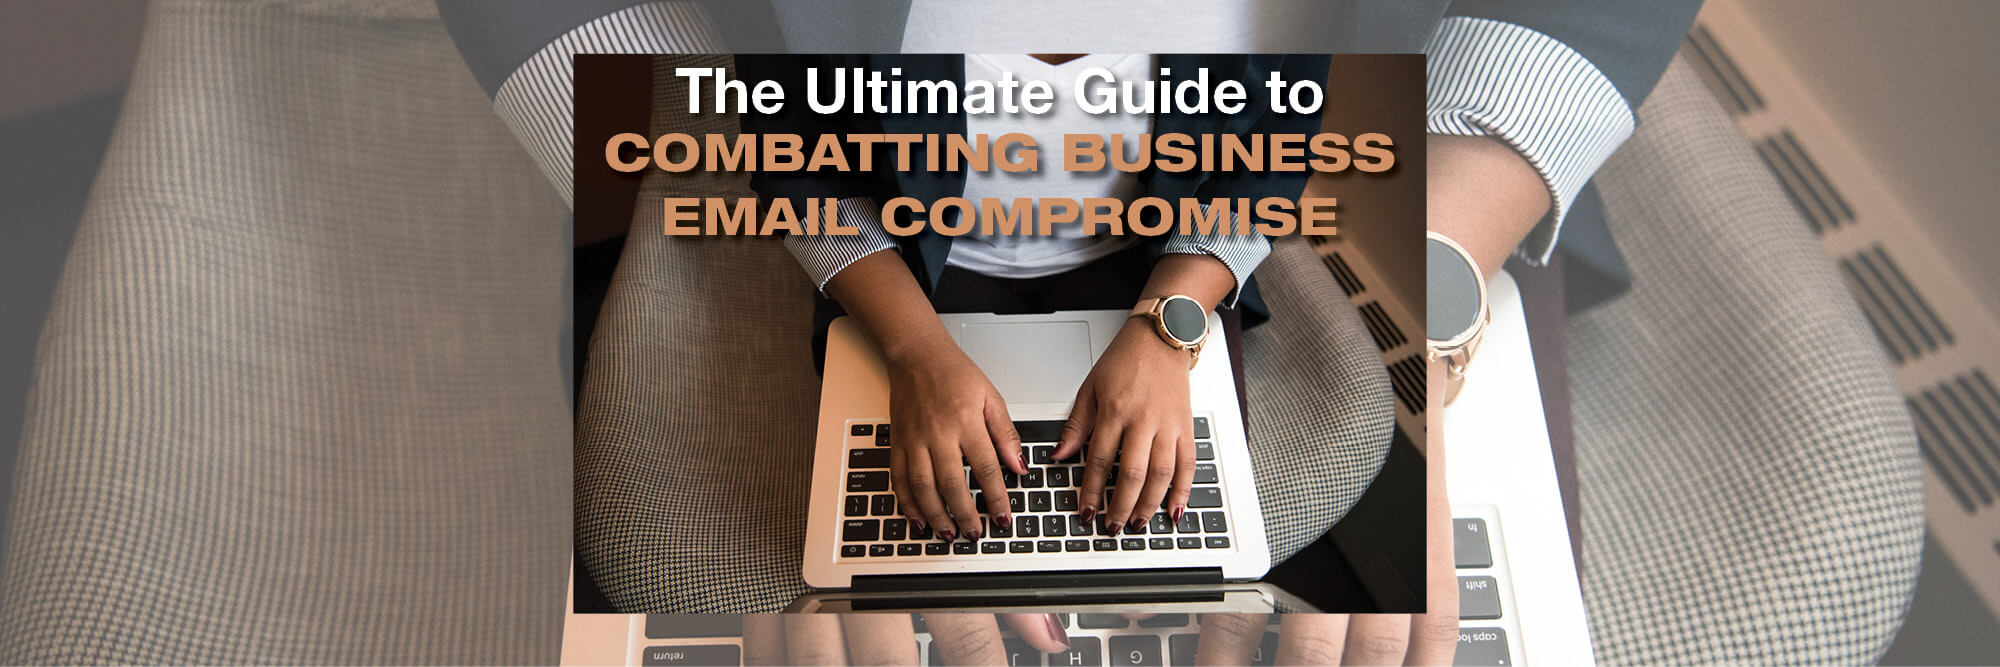 The Technical Guide to Combatting Business Email Compromise